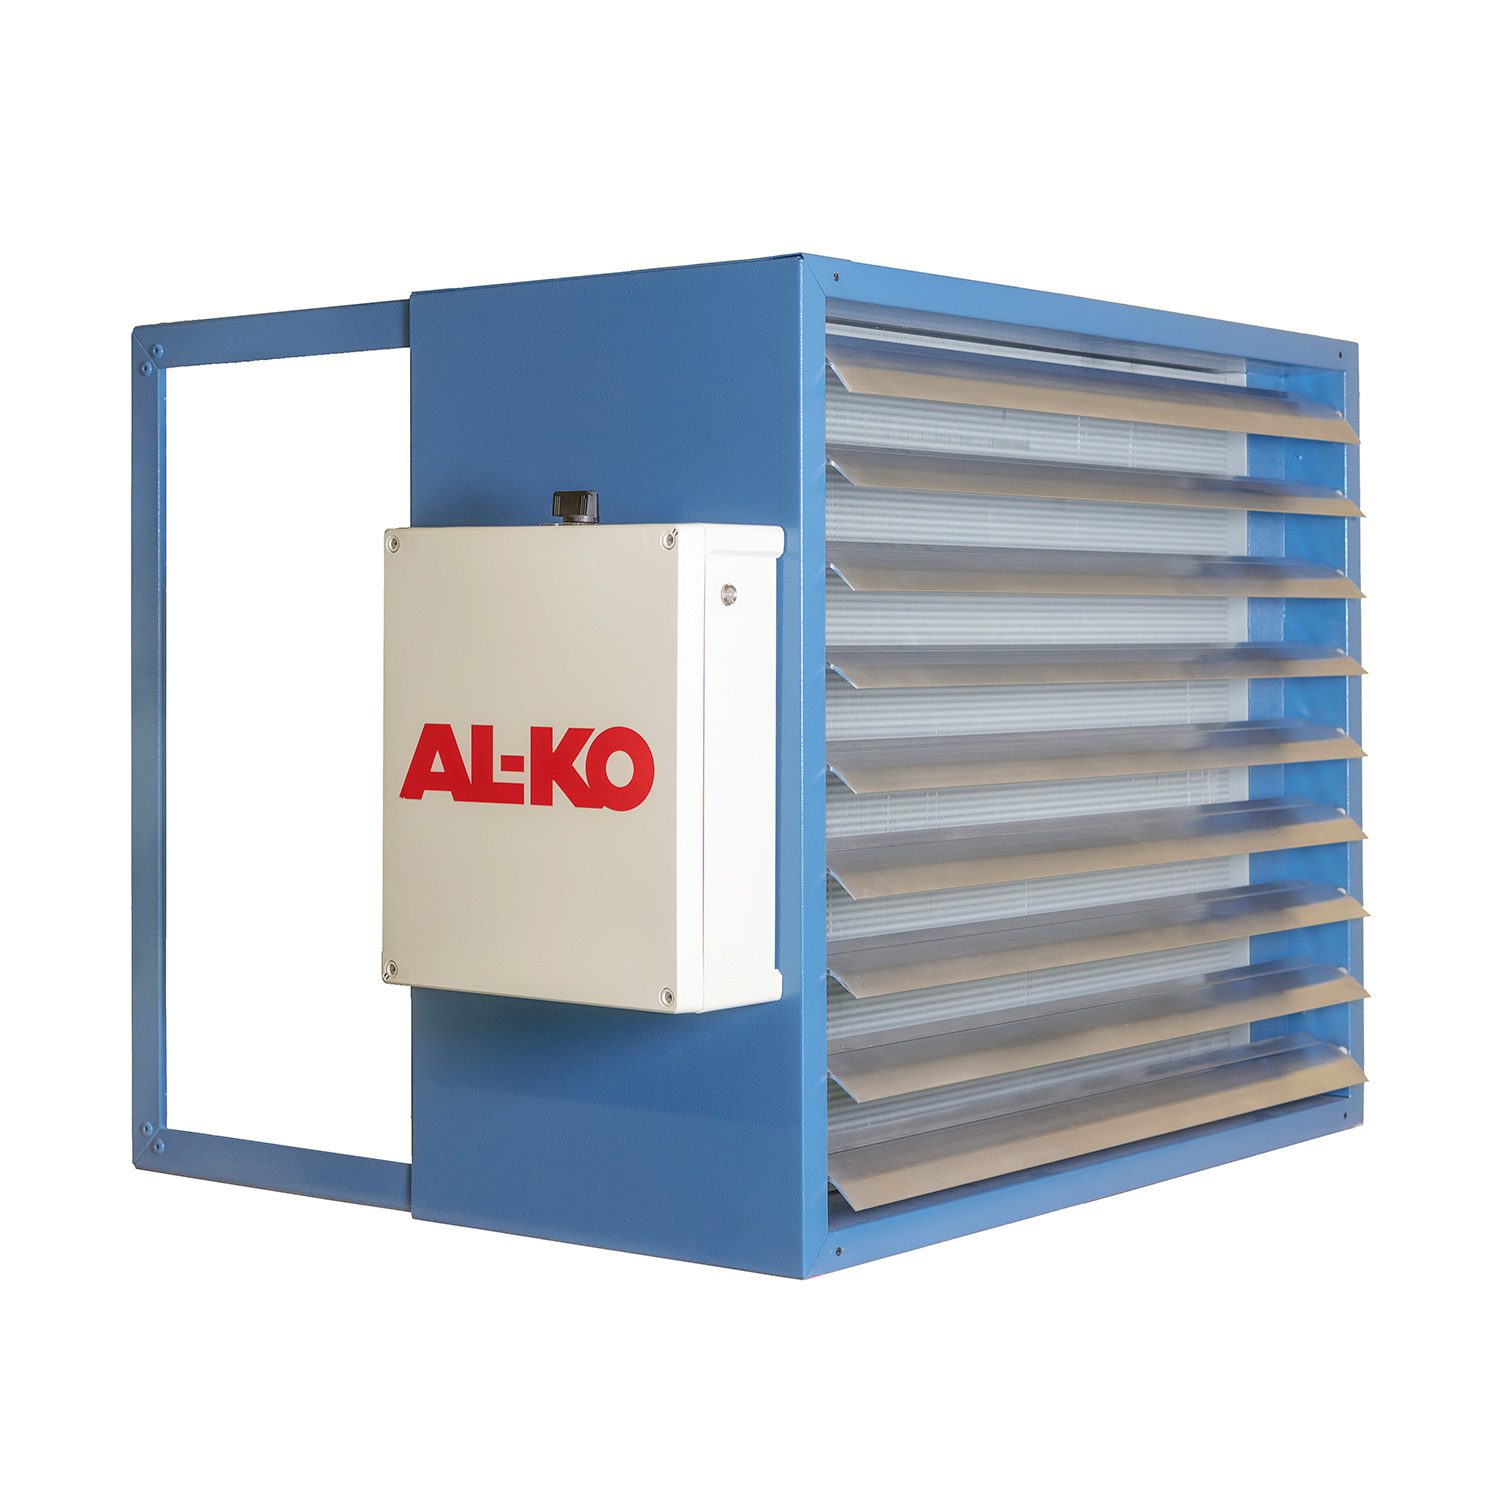 AL-KO INDUSTRIE air heater and air cooler – for larger rooms